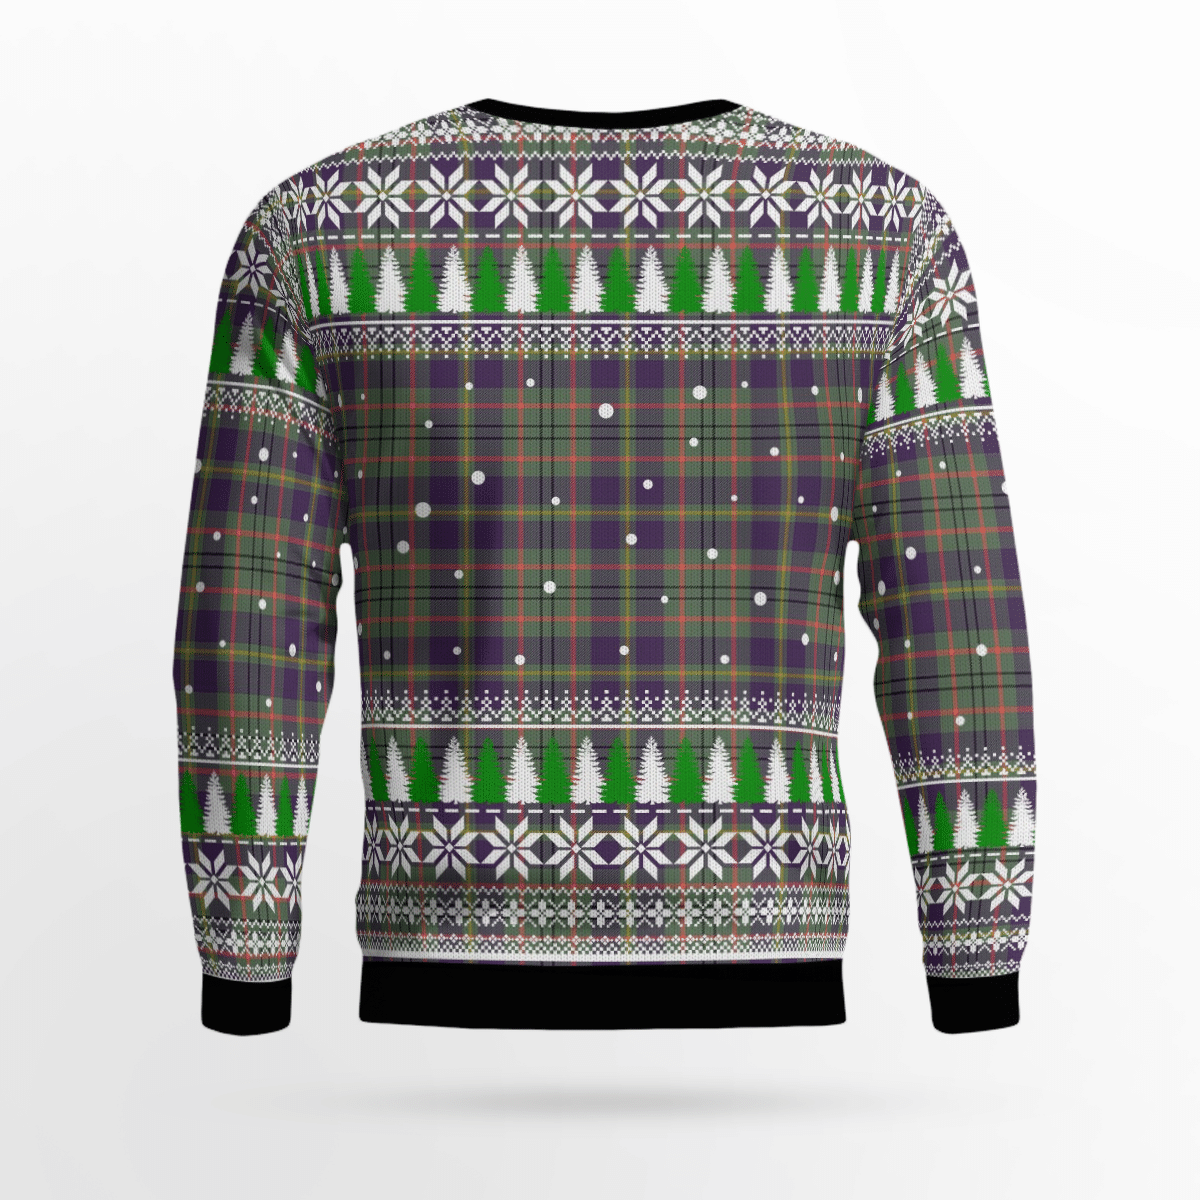 Clan Taylor Weathered Crest Tartan Christmas Ugly Sweater KP12 Taylor Weathered Crest Tartan Tartan Ugly Sweater   